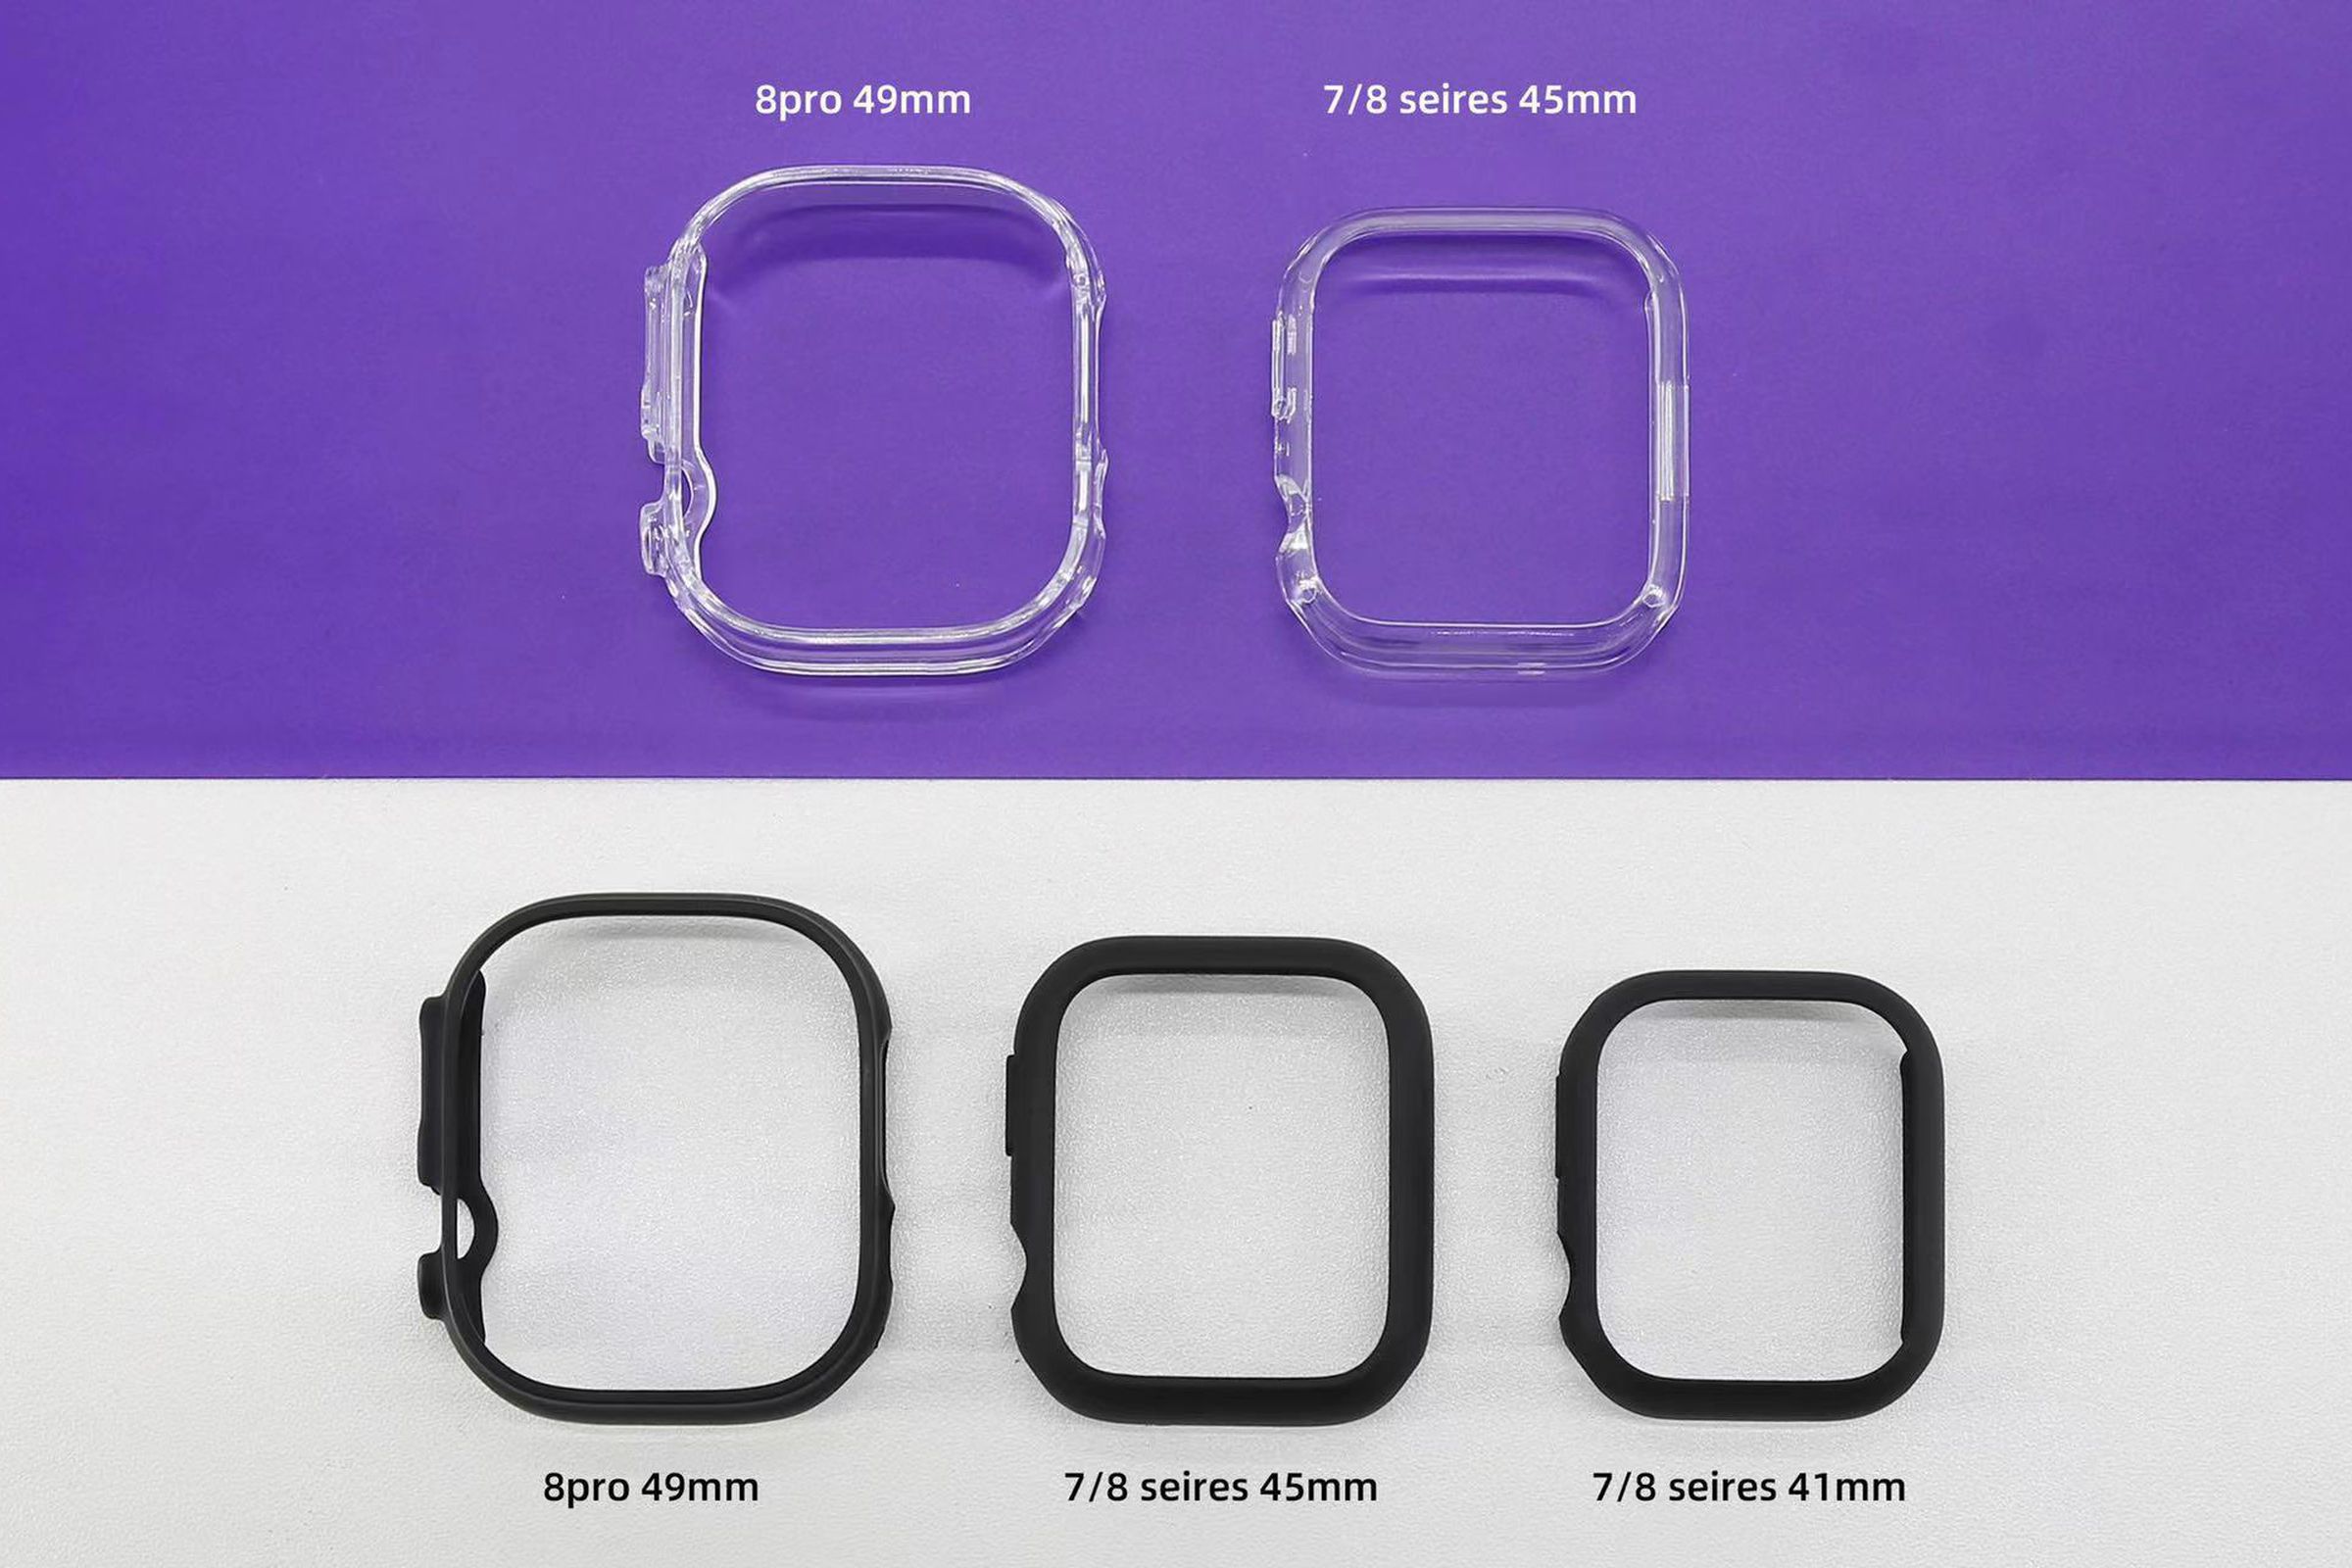 Apple Watch Pro size comparison based on leaked cases.